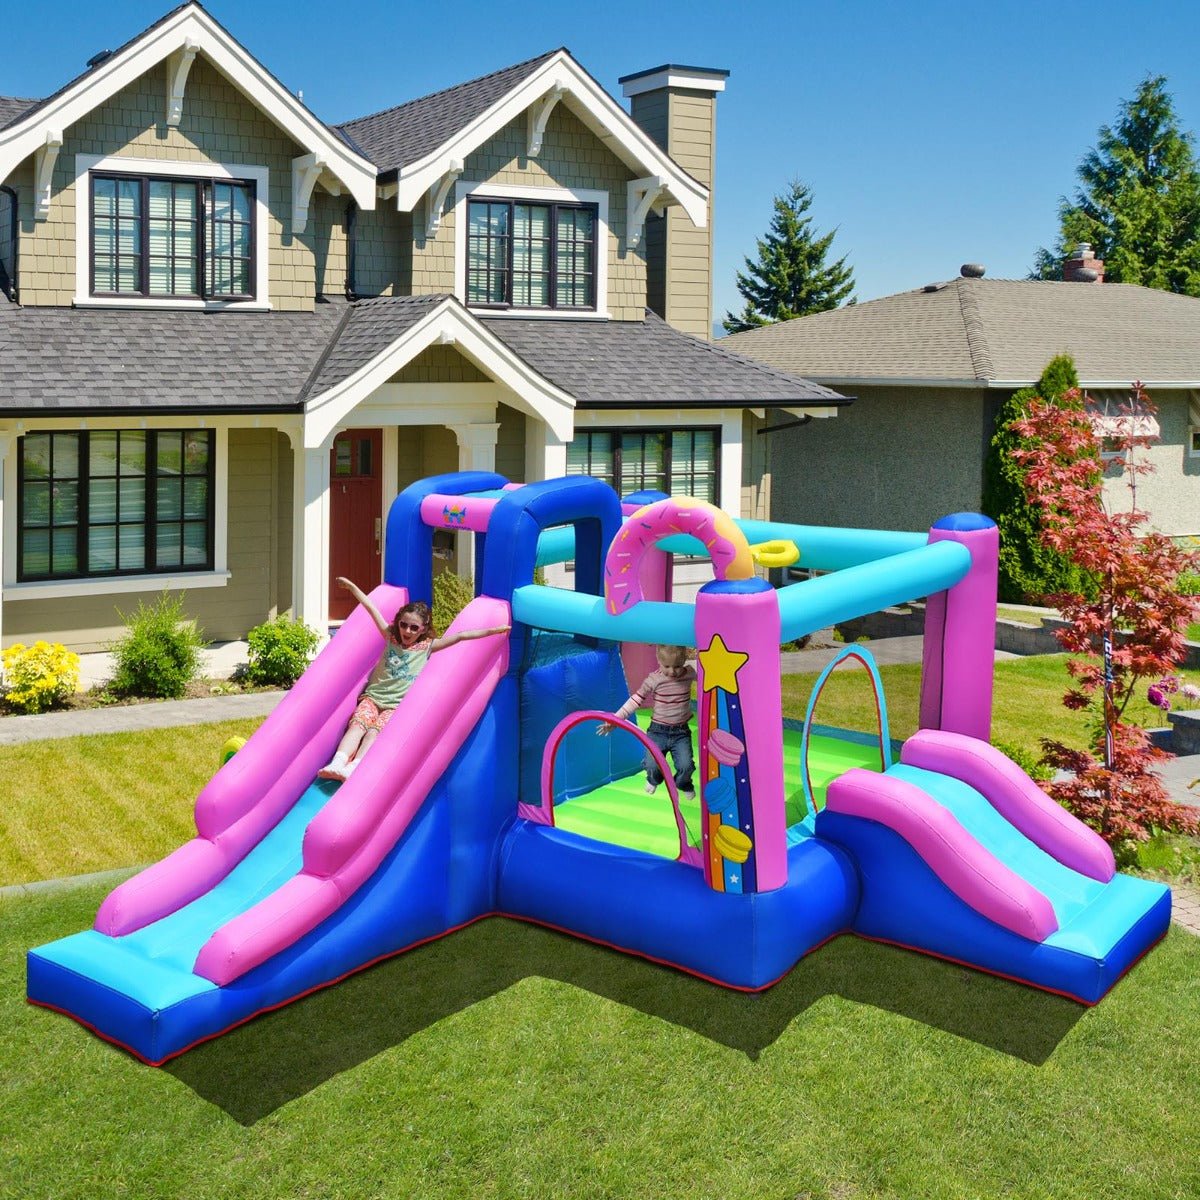 Dual Slide Delight: Inflatable Bounce House for Kids with Twin Slides